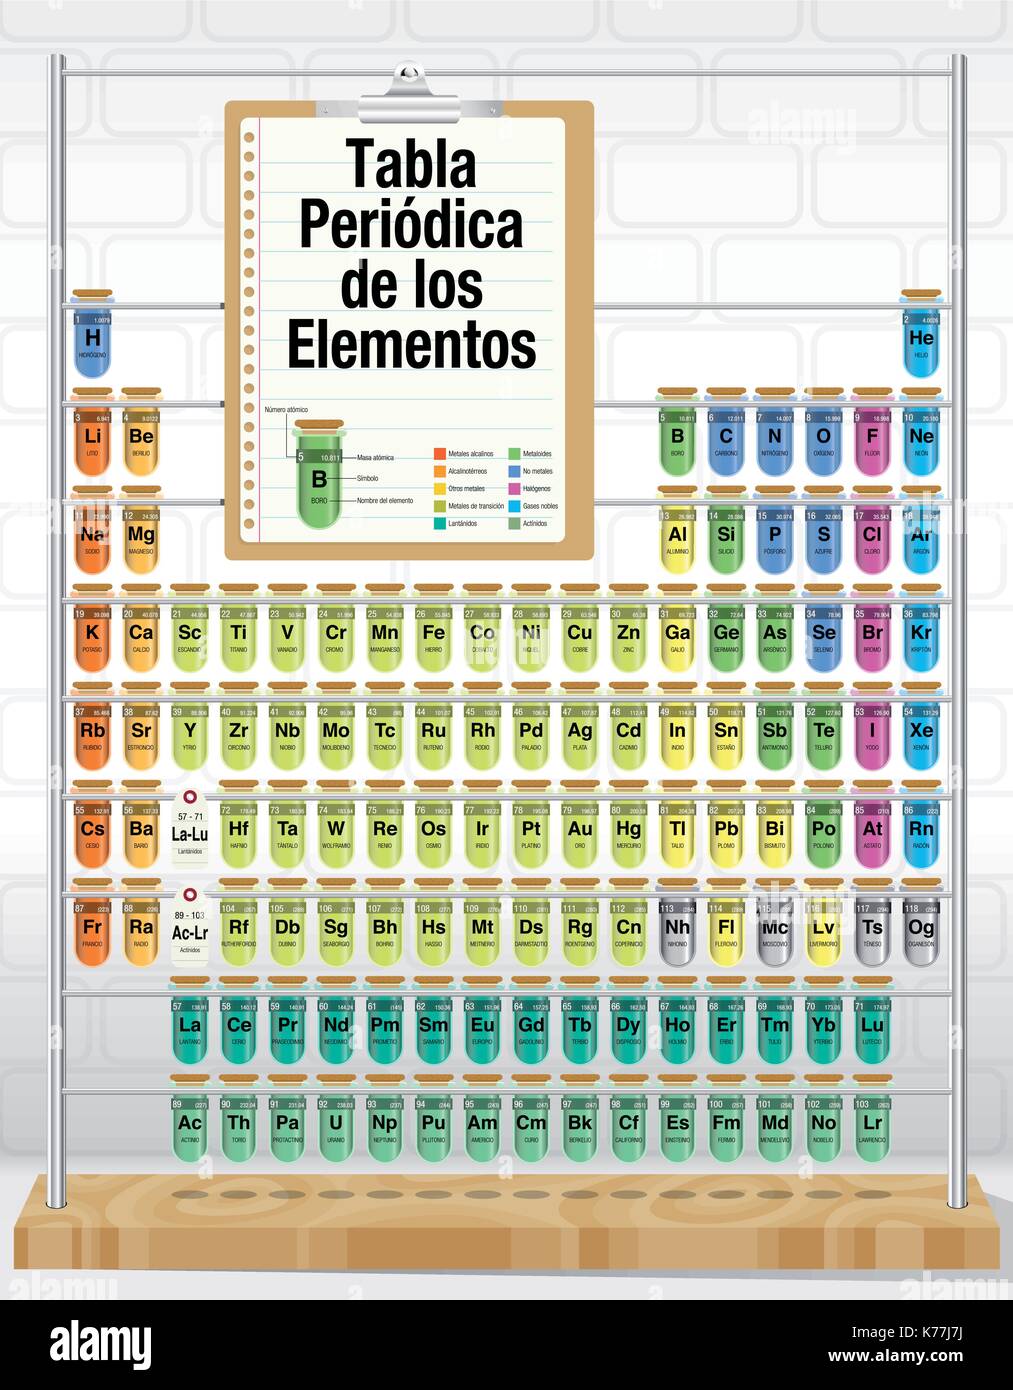 TABLA PERIODICA DE LOS ELEMENTOS -Periodic Table of Elements in Spanish language- consisting of test tubes with the names and number of each element Stock Vector